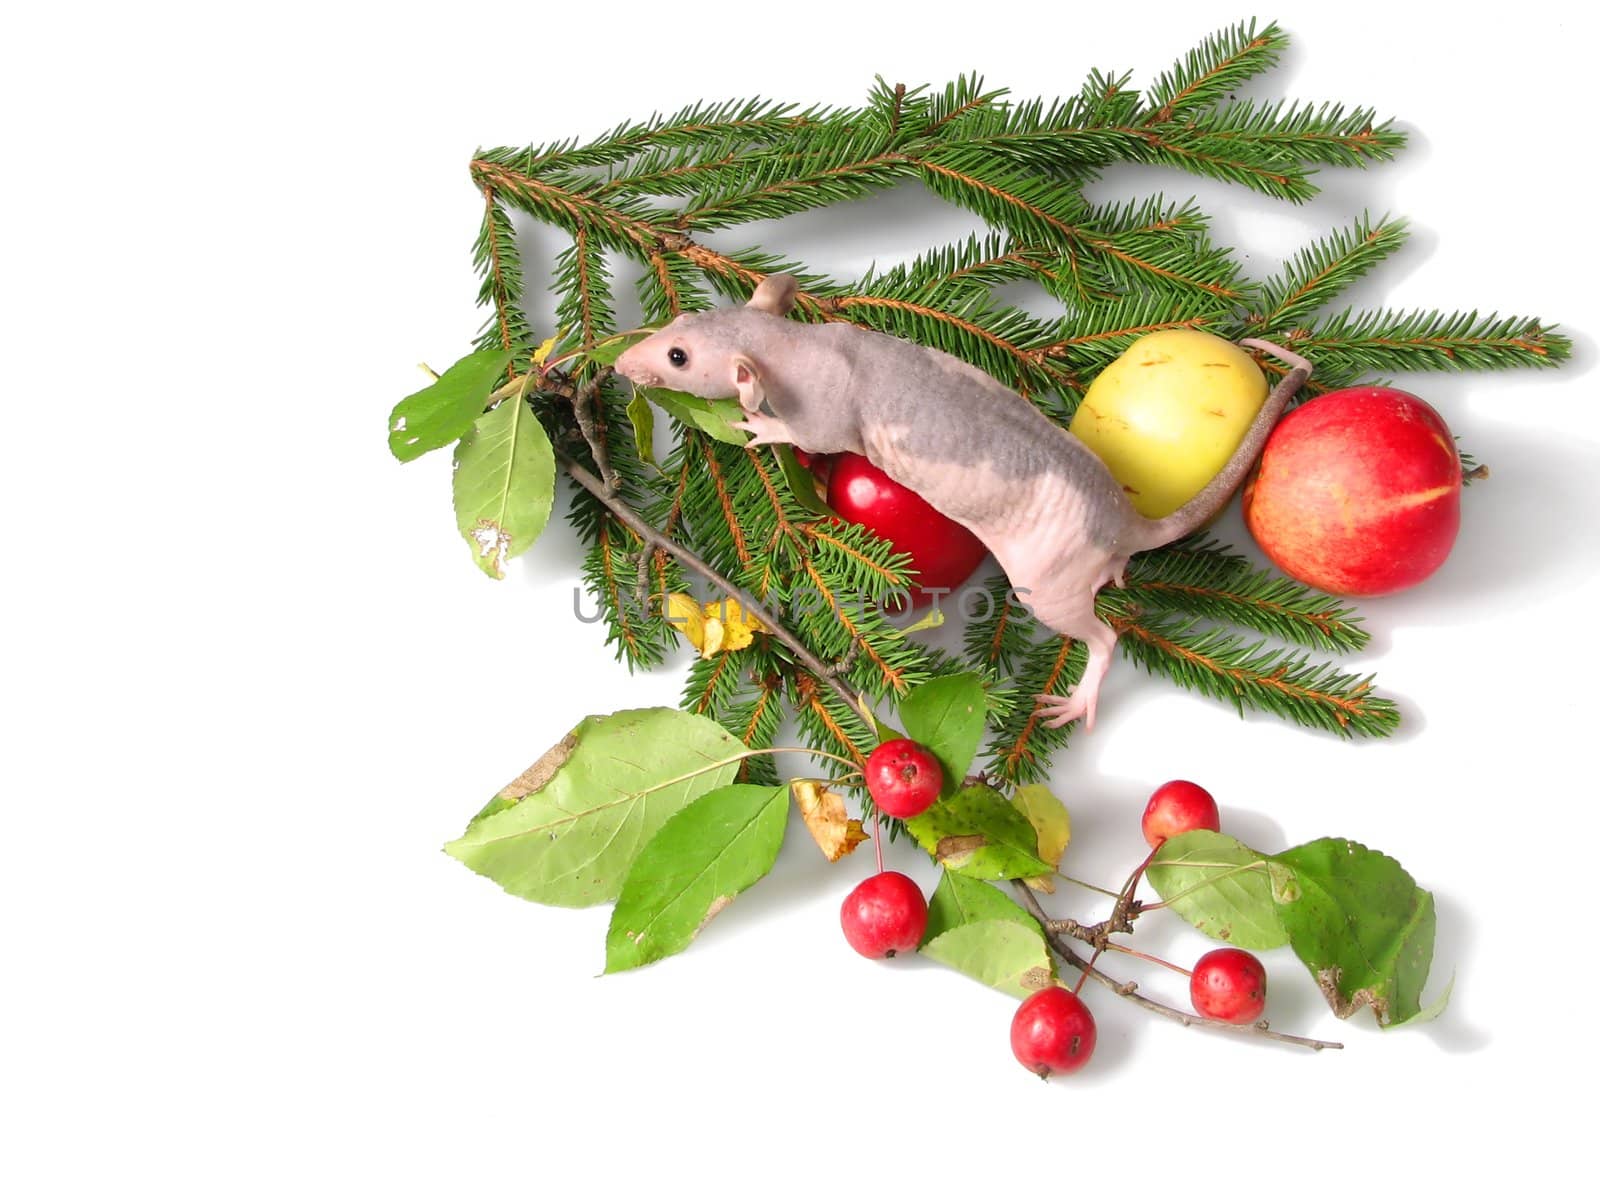 Rat on a branch of a New Year tree by Svetovid